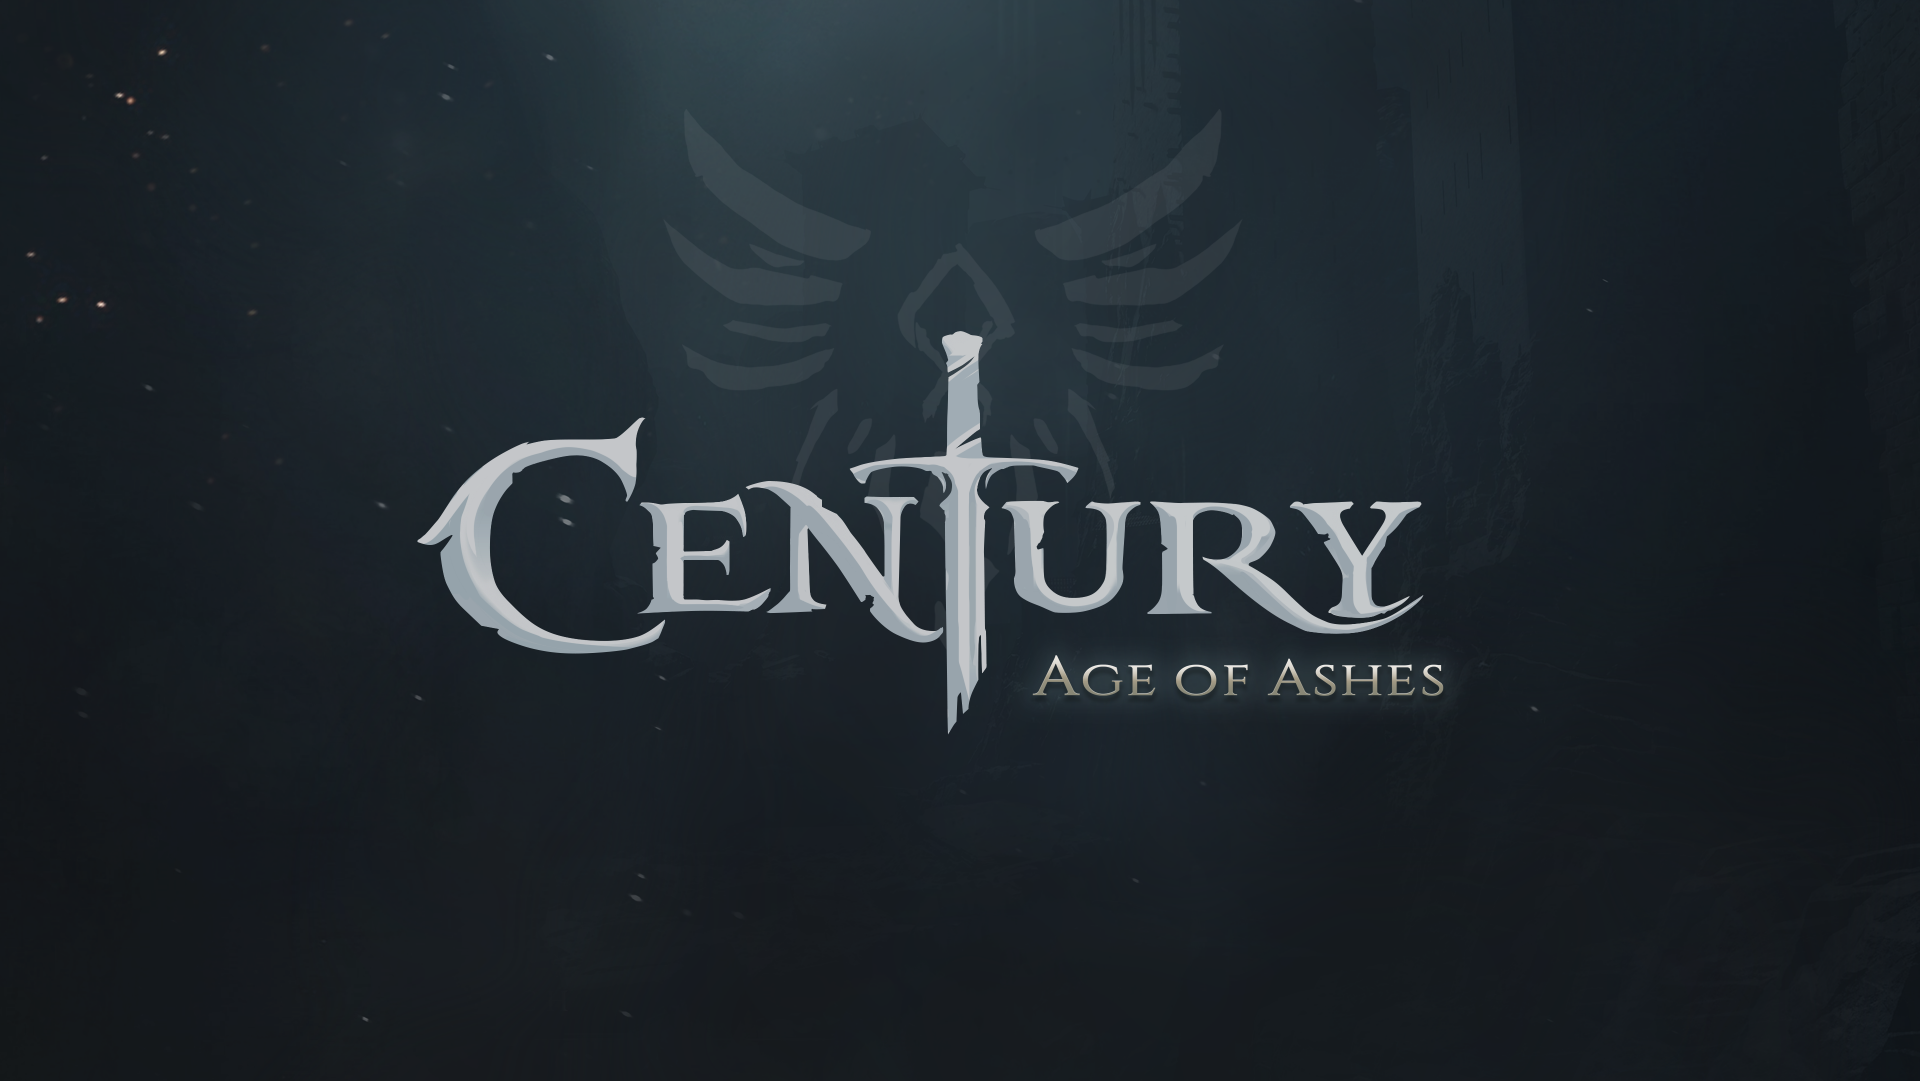 century: age of ashes lore